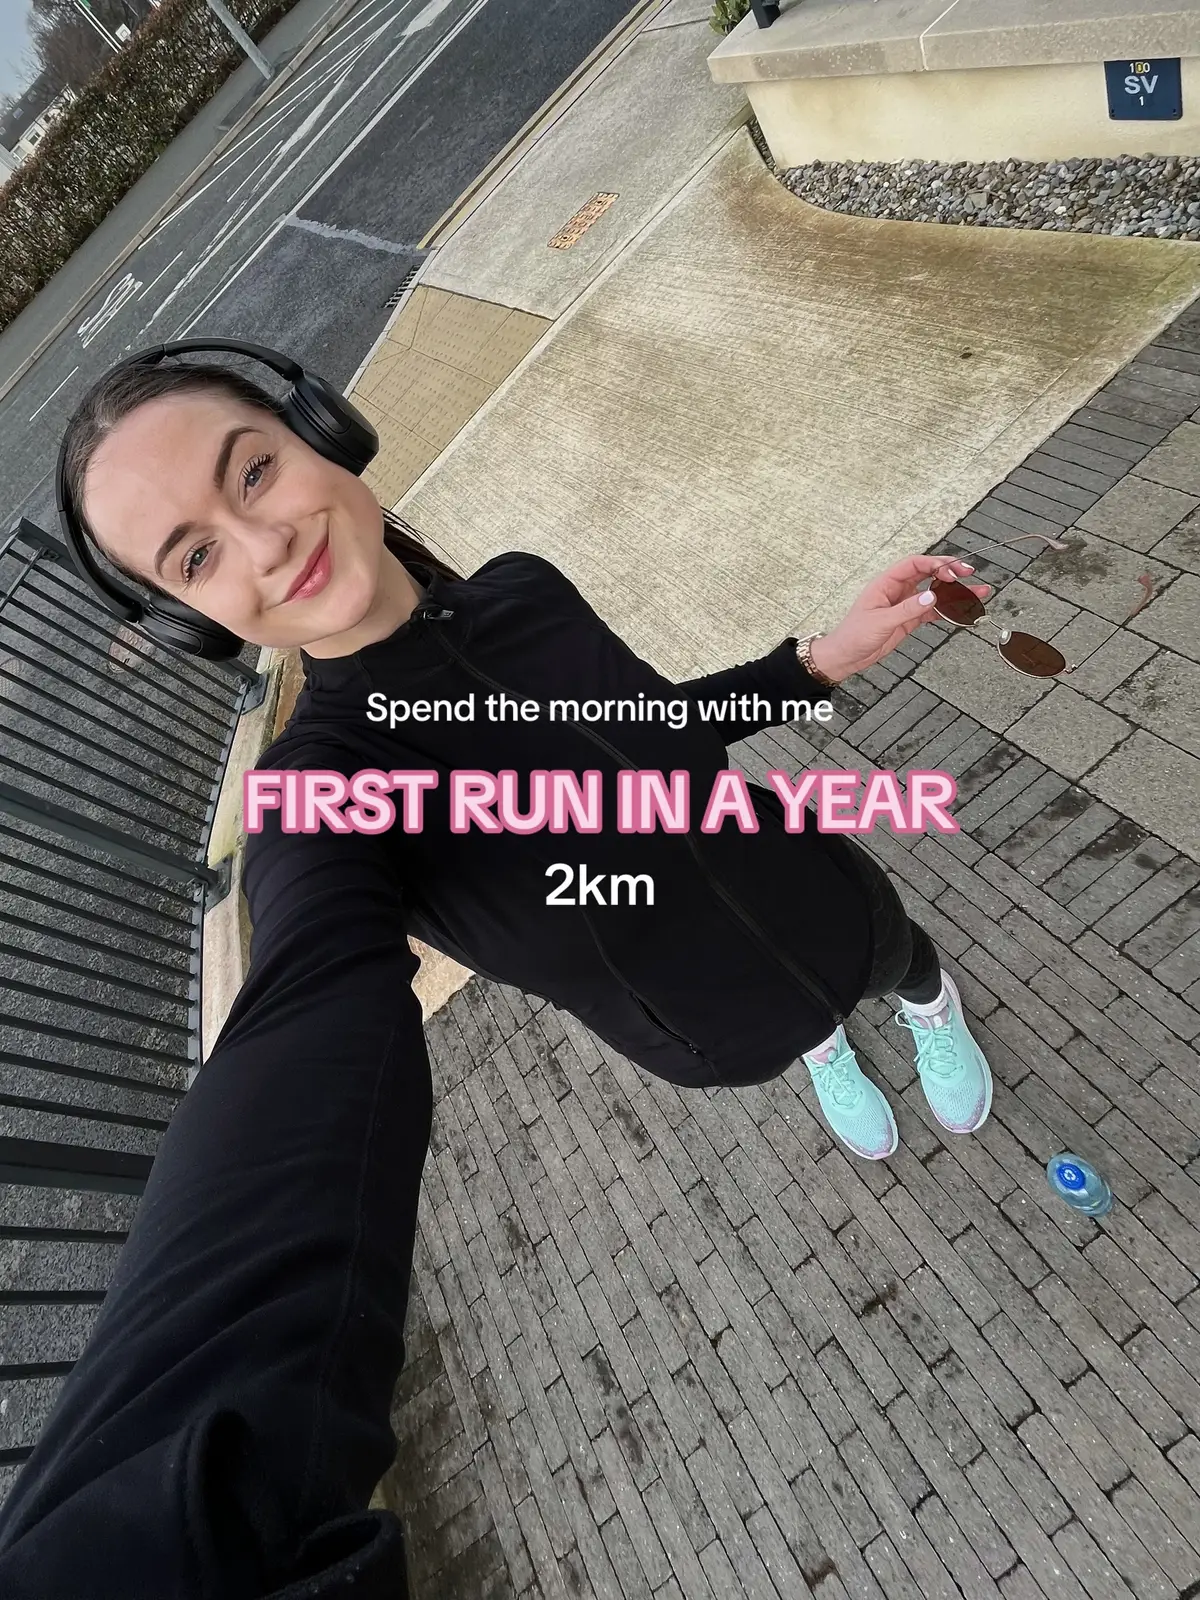 To confirm I am so sore the day after so 2km was defo enough to begin with…so excited for my next one already though!!! 🏃🏼‍♀️ #run #Fitness #fyp 